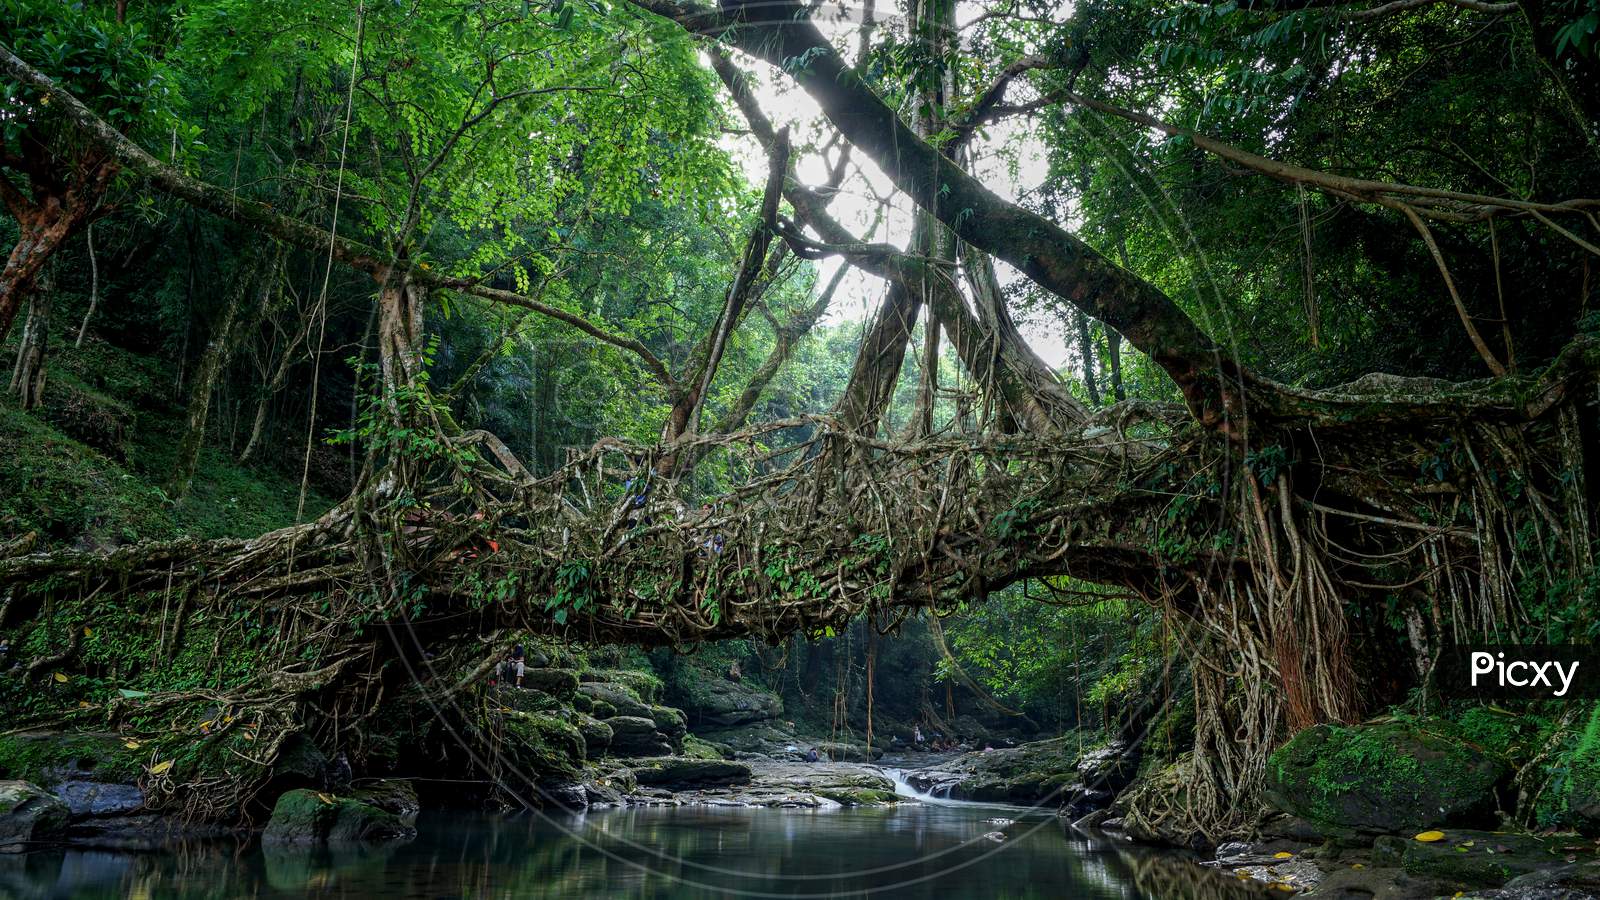 View of arch shaped tree along the water stream